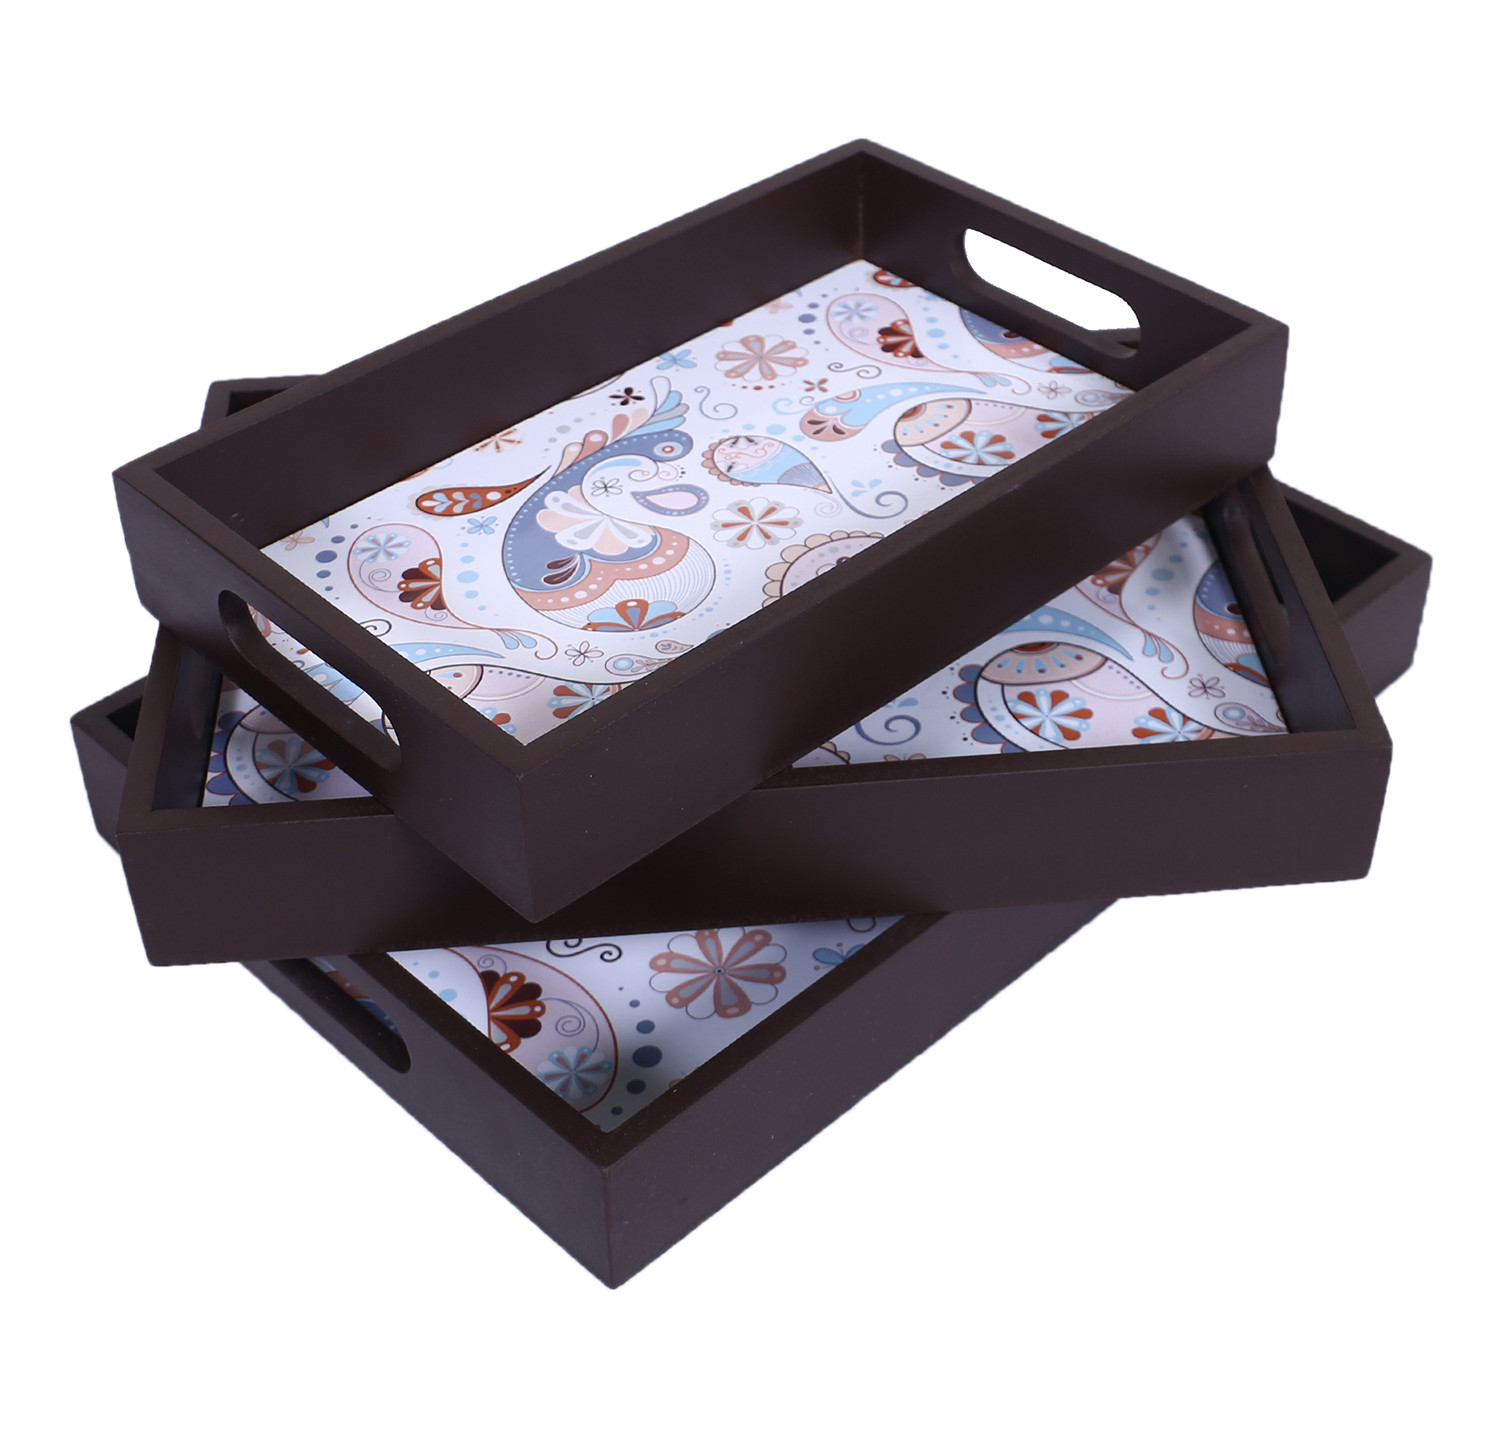 Kuber Industries Nested Serving Trays|Wooden Paisley Design Farmhouse Platter|Rectangular Shape Coffee Table Tray with Handles for Kitchen,Dining Area,Set of 3 (Brown)